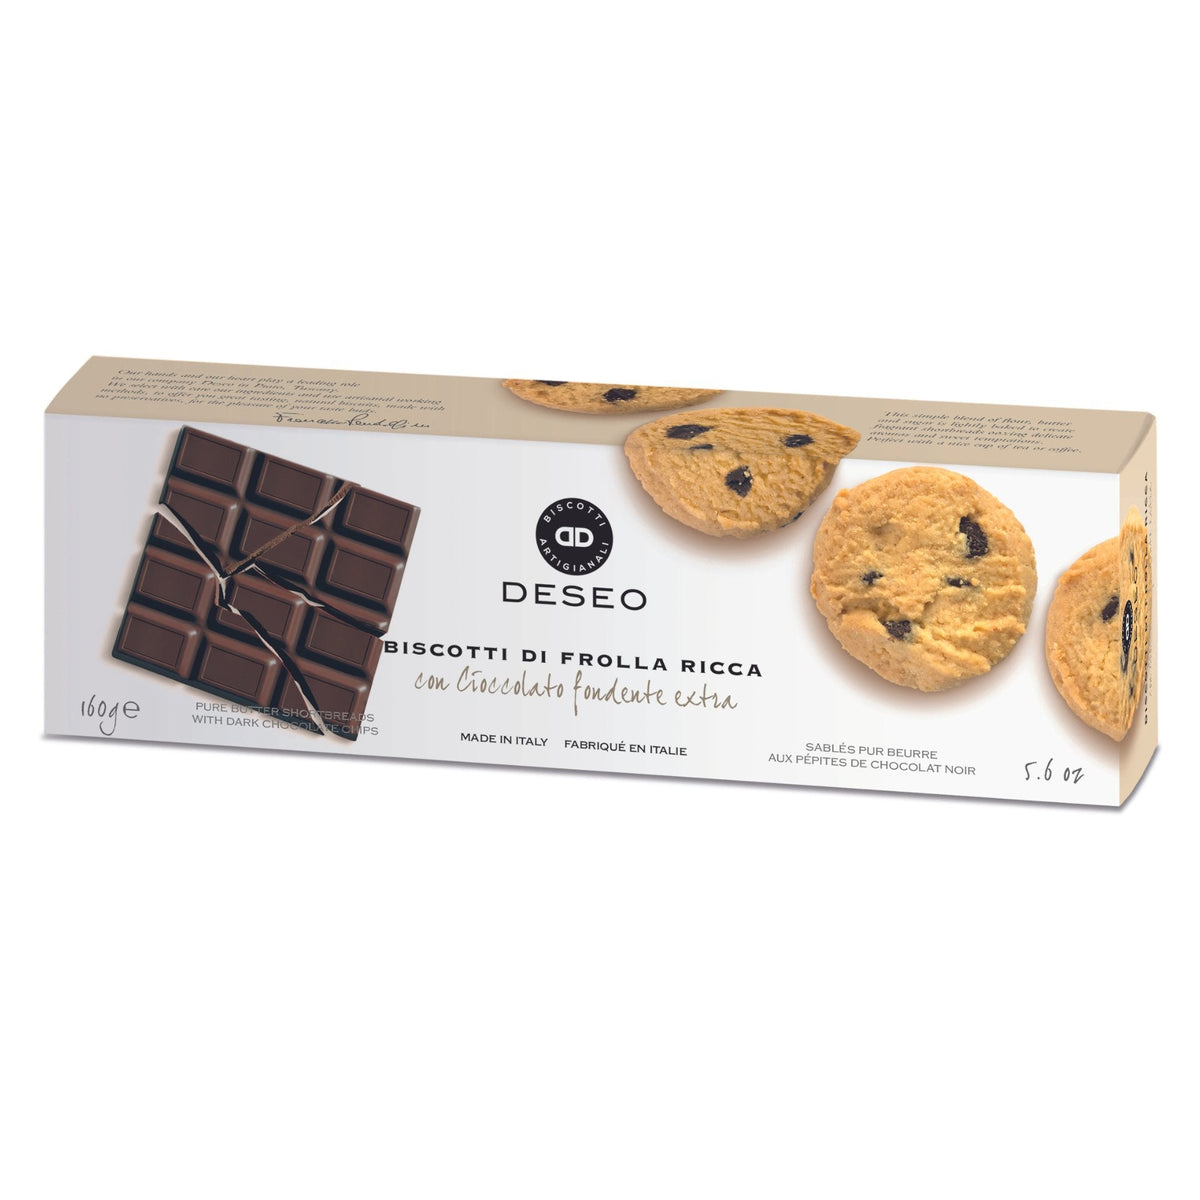 Deseo Dark Chocolate Shortbread 160g (Box)  | Imported and distributed in the UK by Just Gourmet Foods